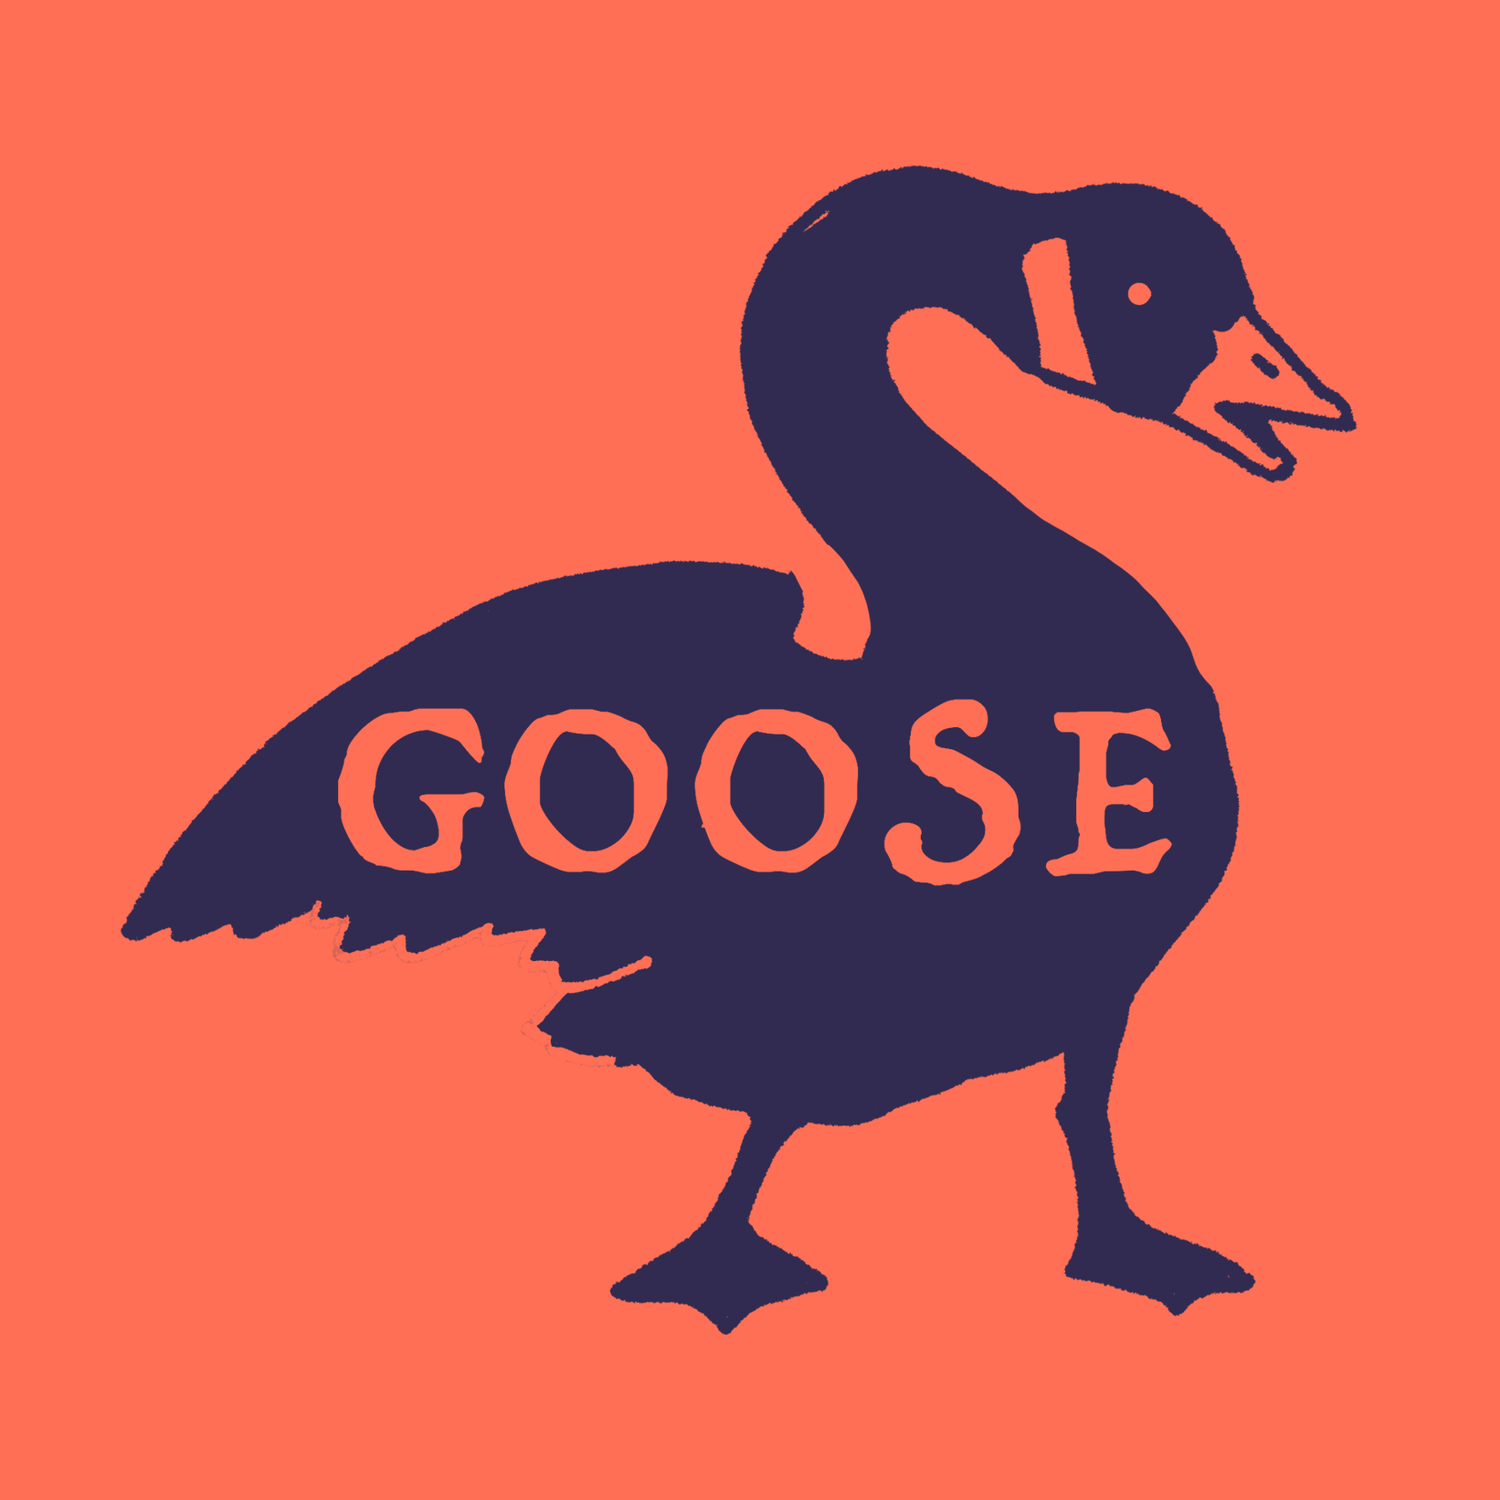 Geese Logo - about — goose